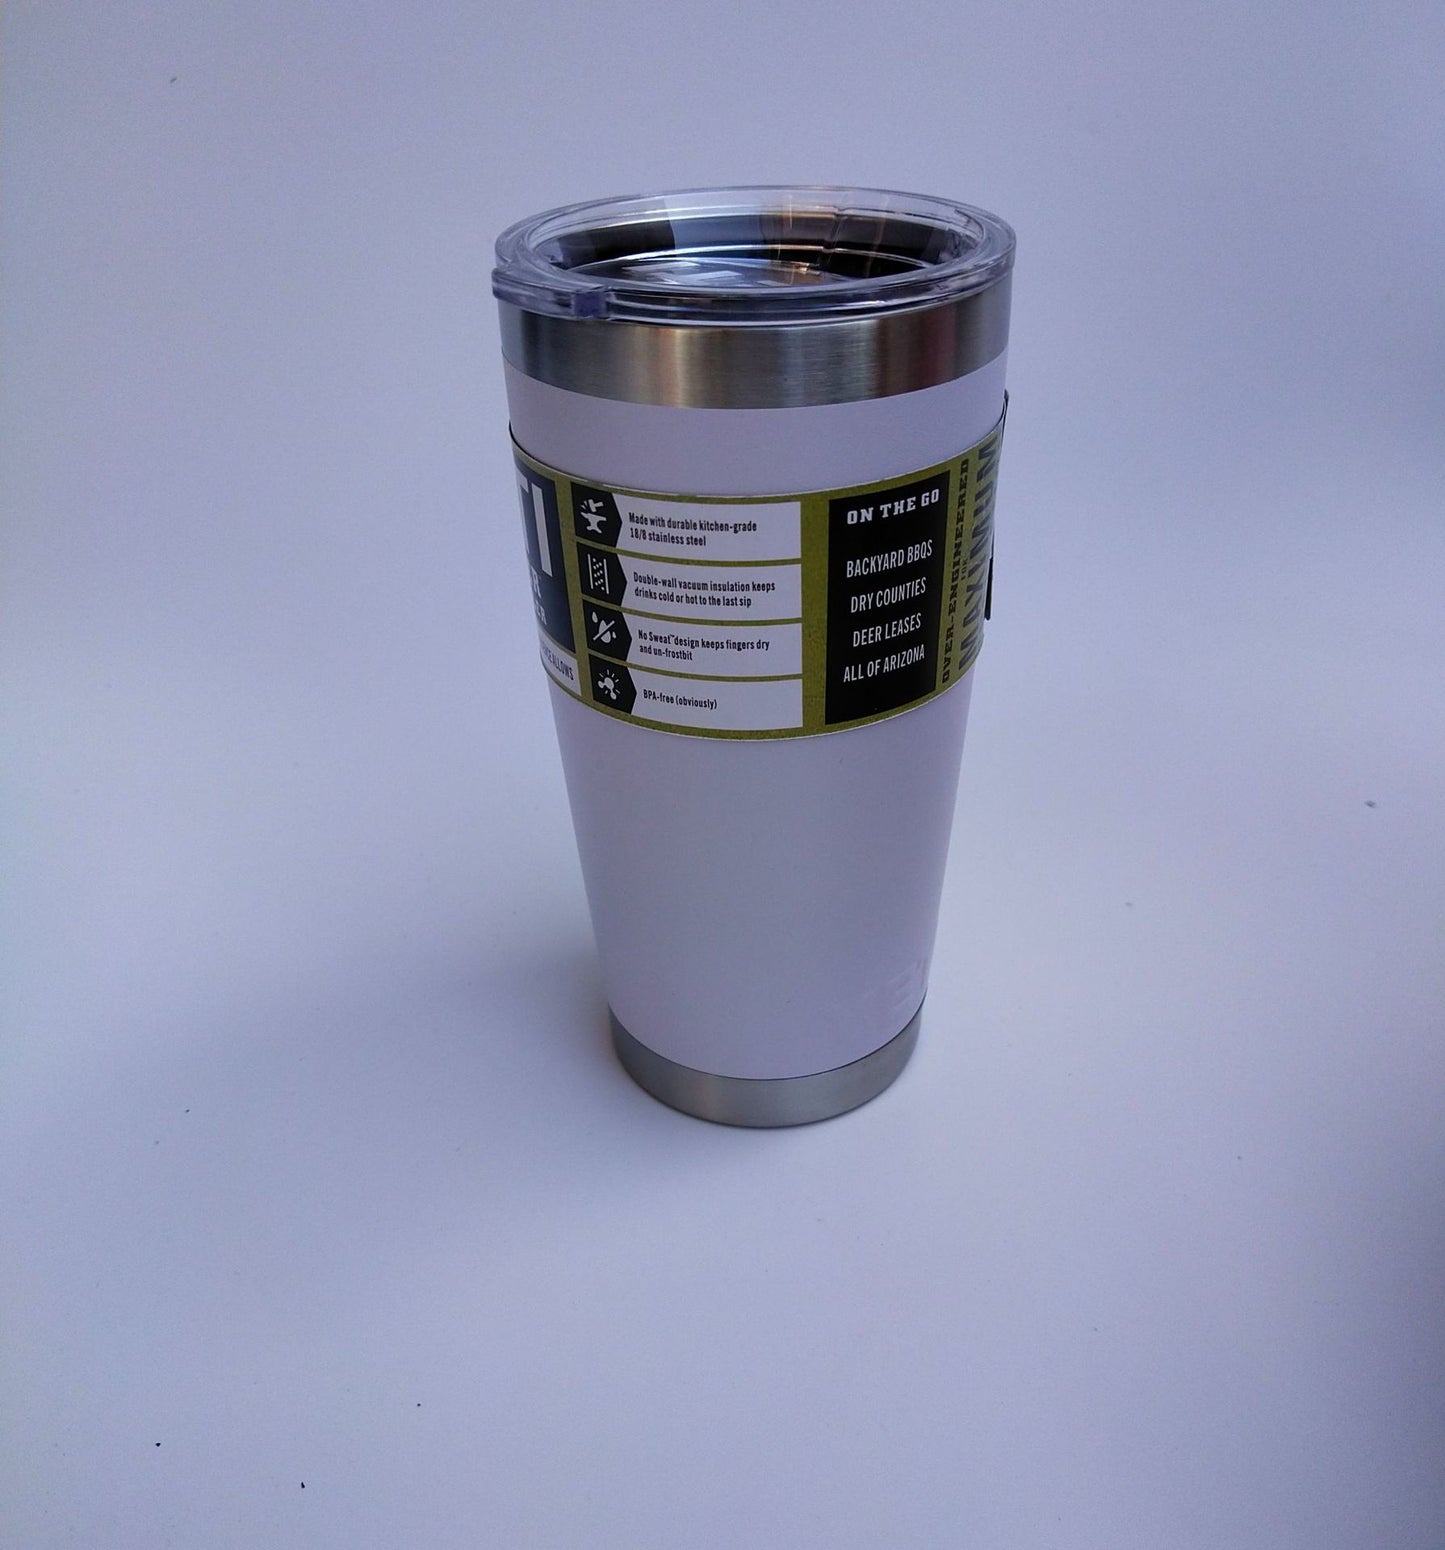 20/30oz Travel Coffee Mug Stainless Steel Thermos Tumbler Water Cup Vacuum Flask Thermo Cups Bottle Thermocup Garrafa Termica